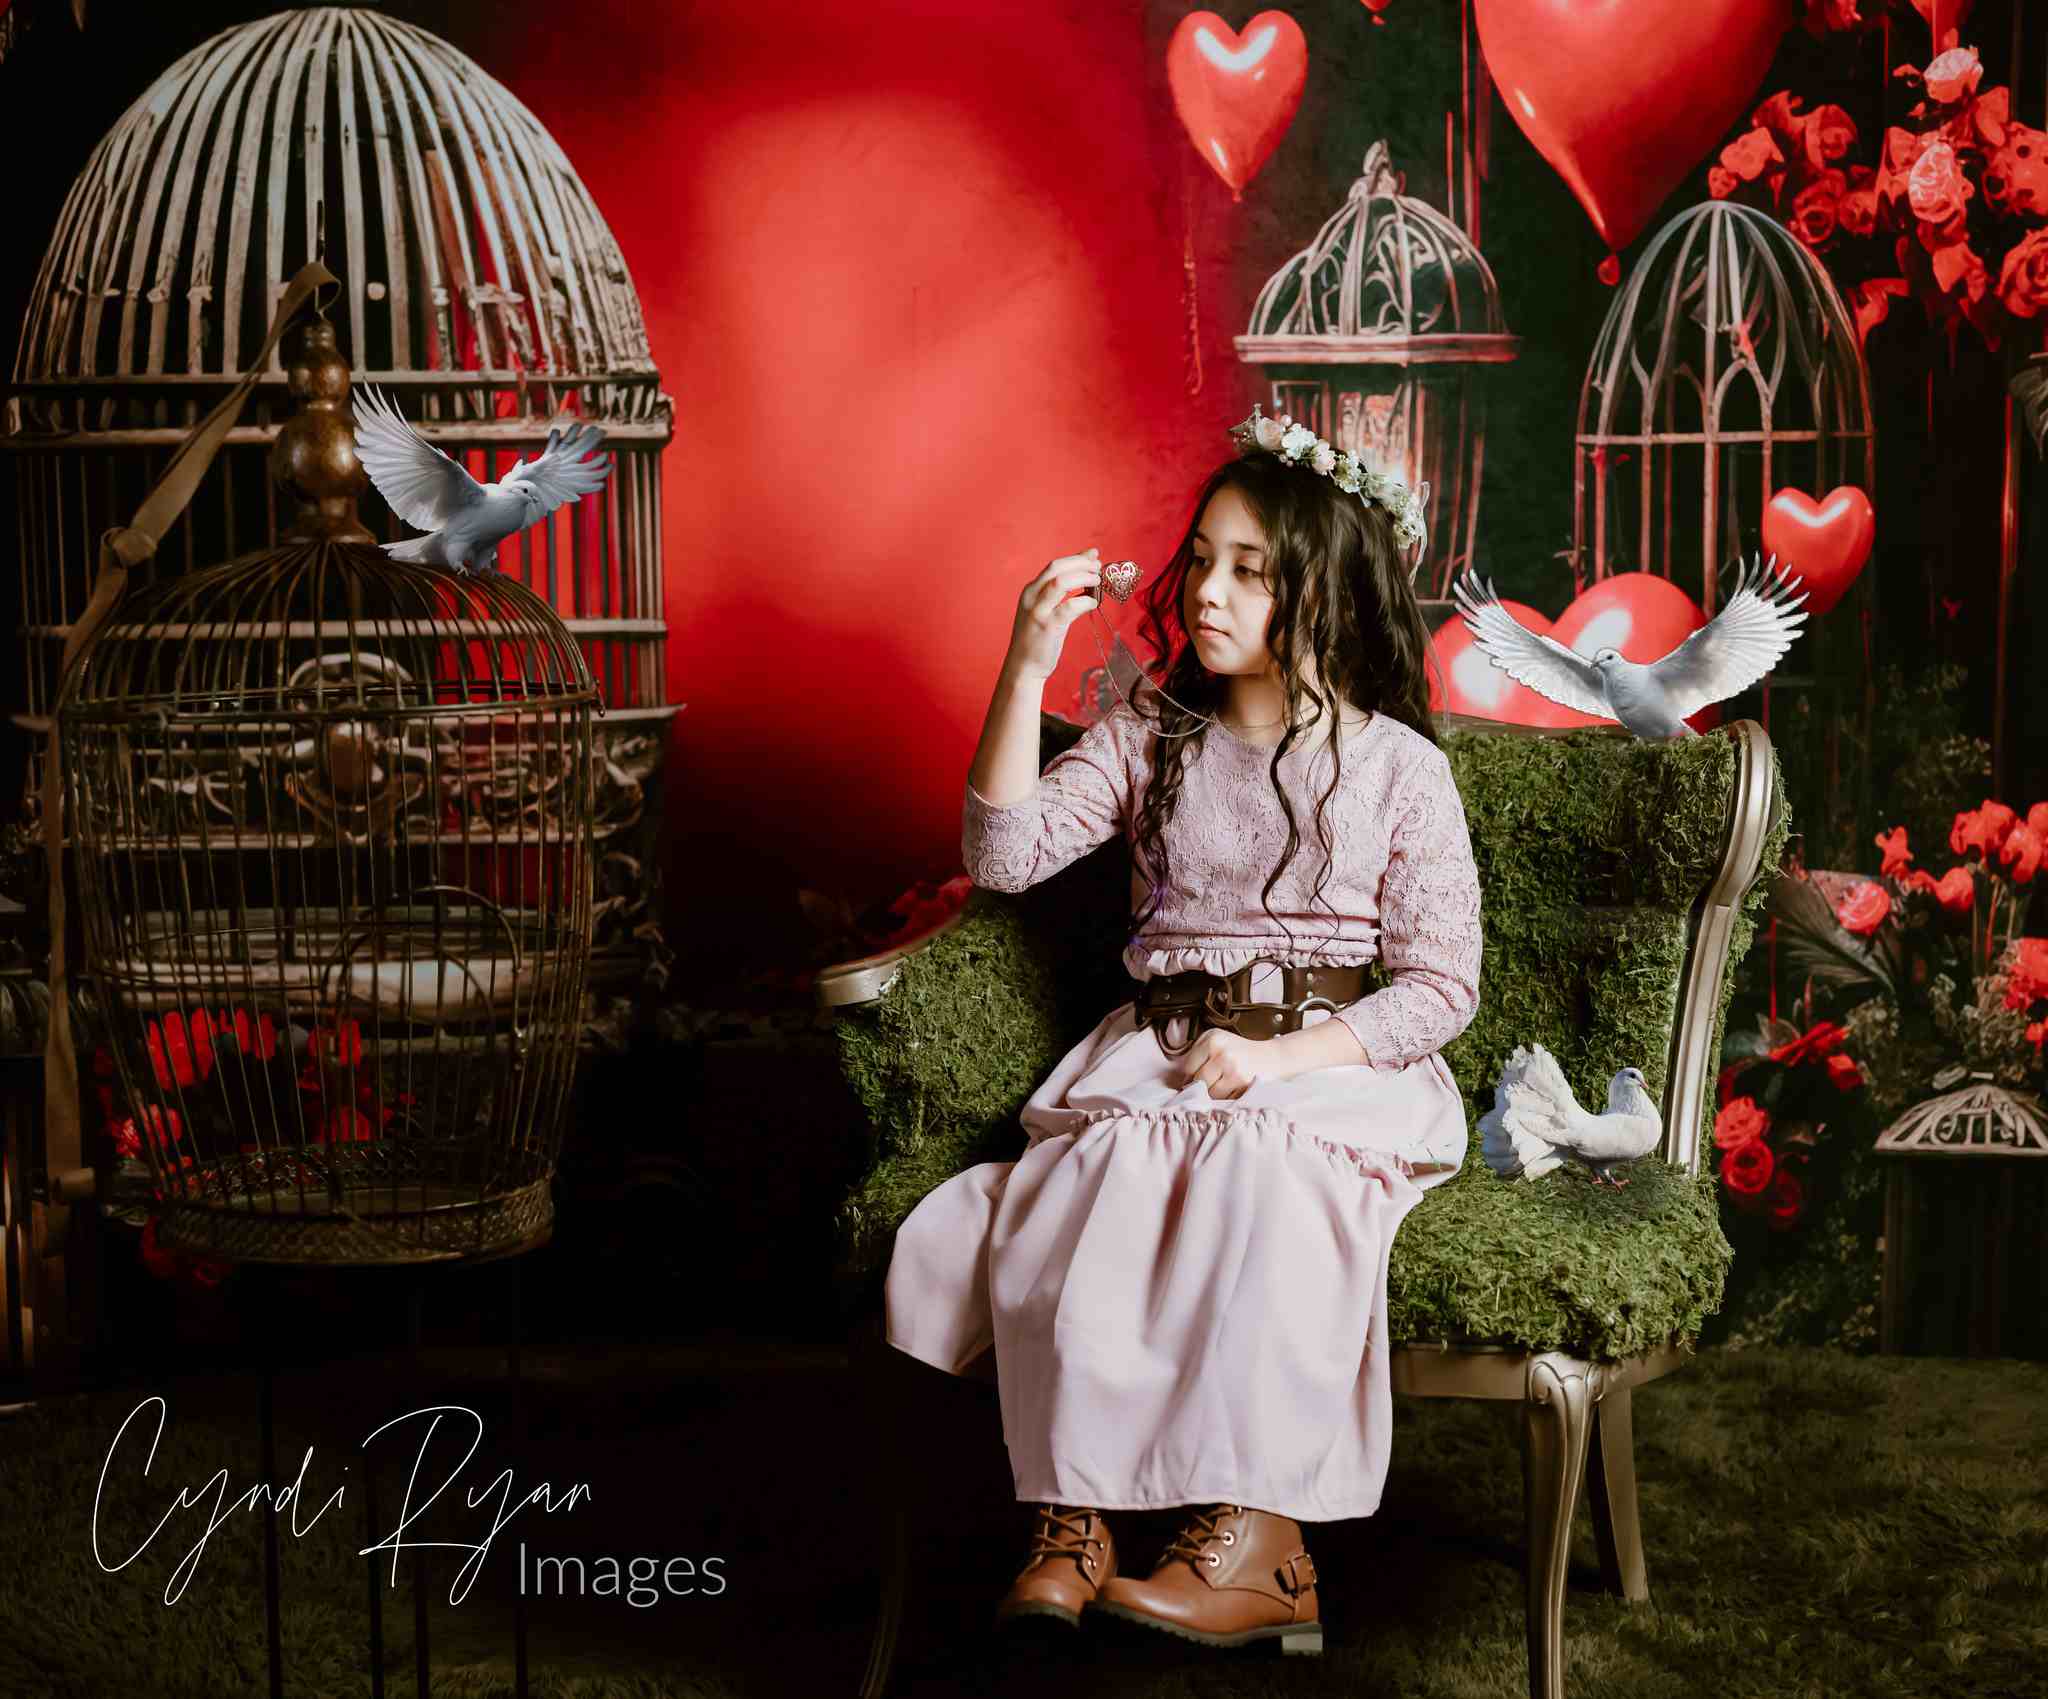 Kate Valentine's Day Balloon Rose Birdcage Backdrop for Photography